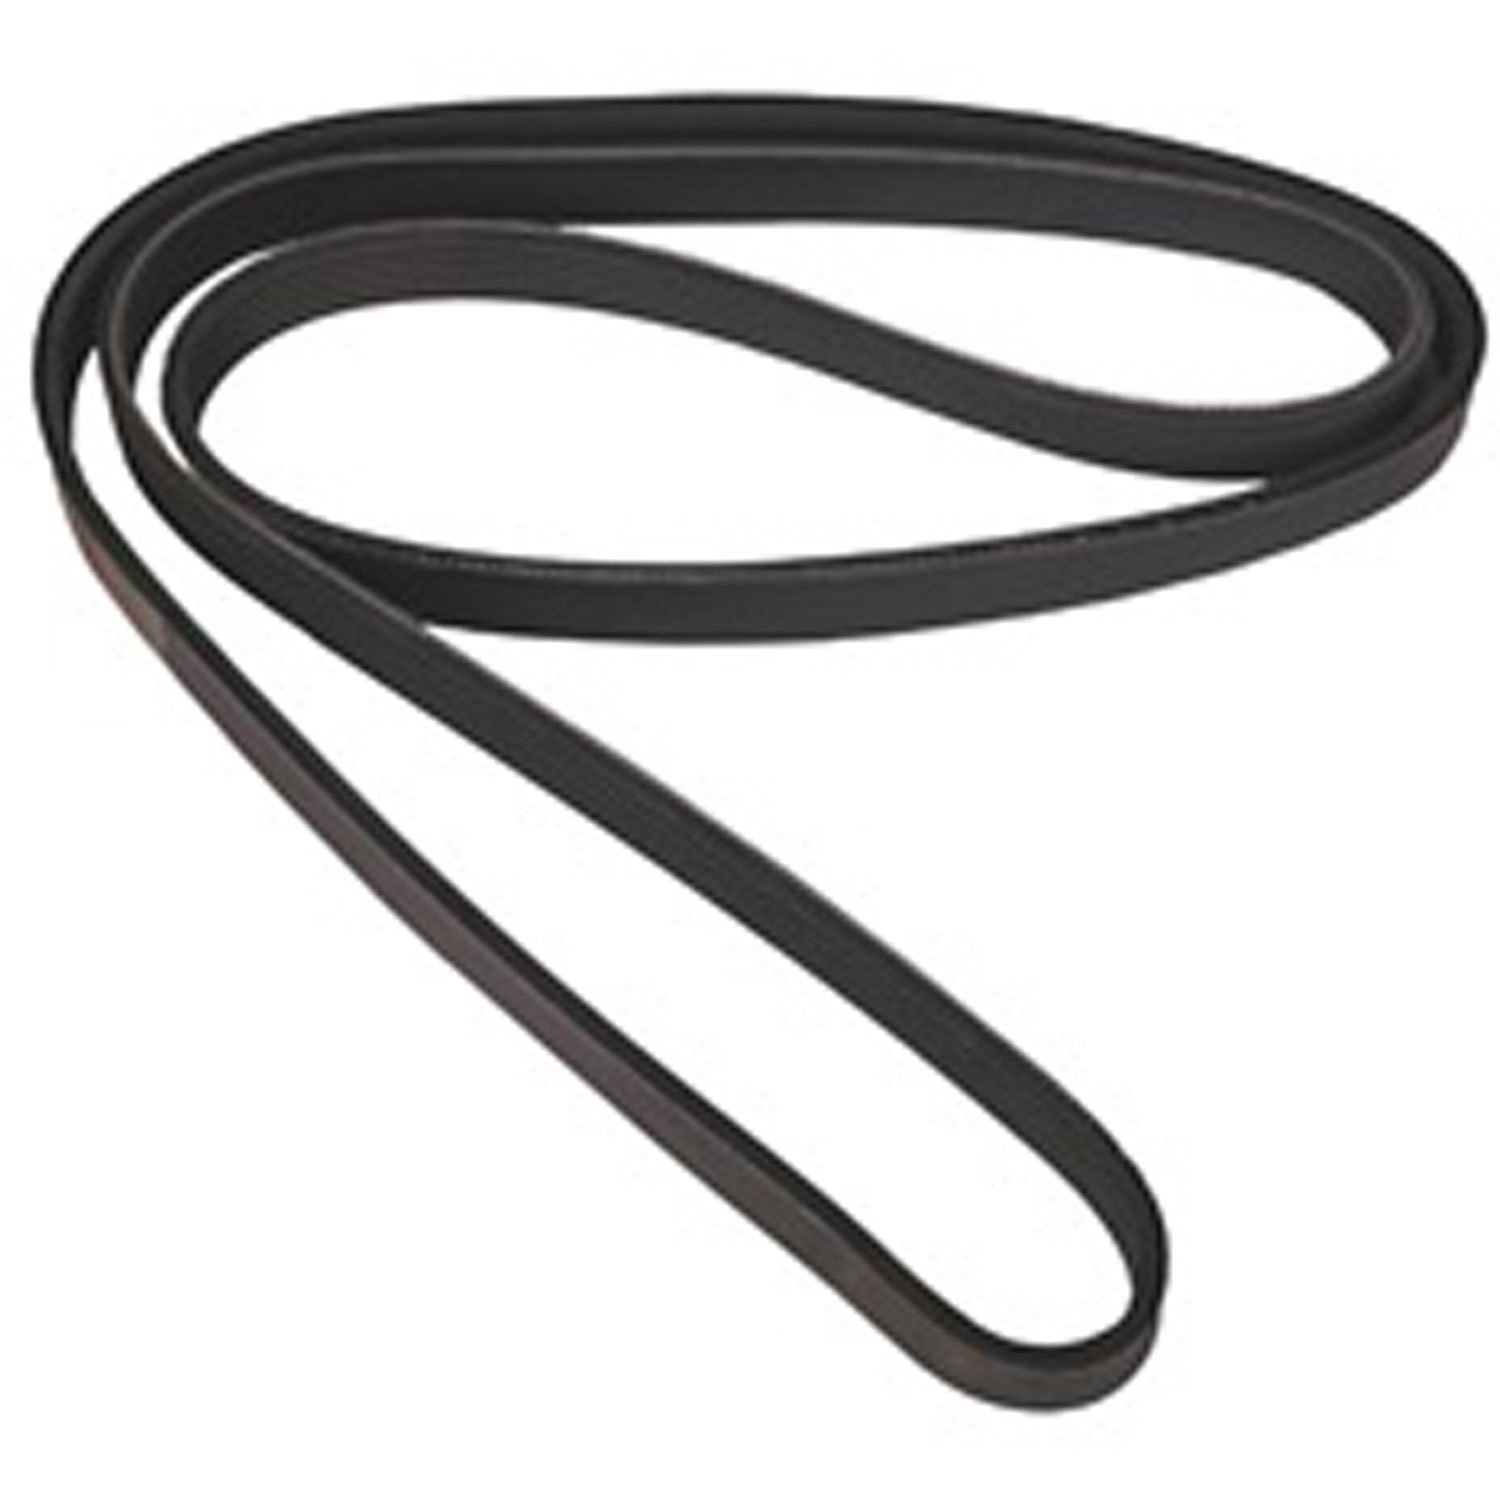 Stock replacement serpentine belt from Omix-ADA, Fits 93-94 Jeep Grand Cherokee ZJ with 5.2 liter engine.